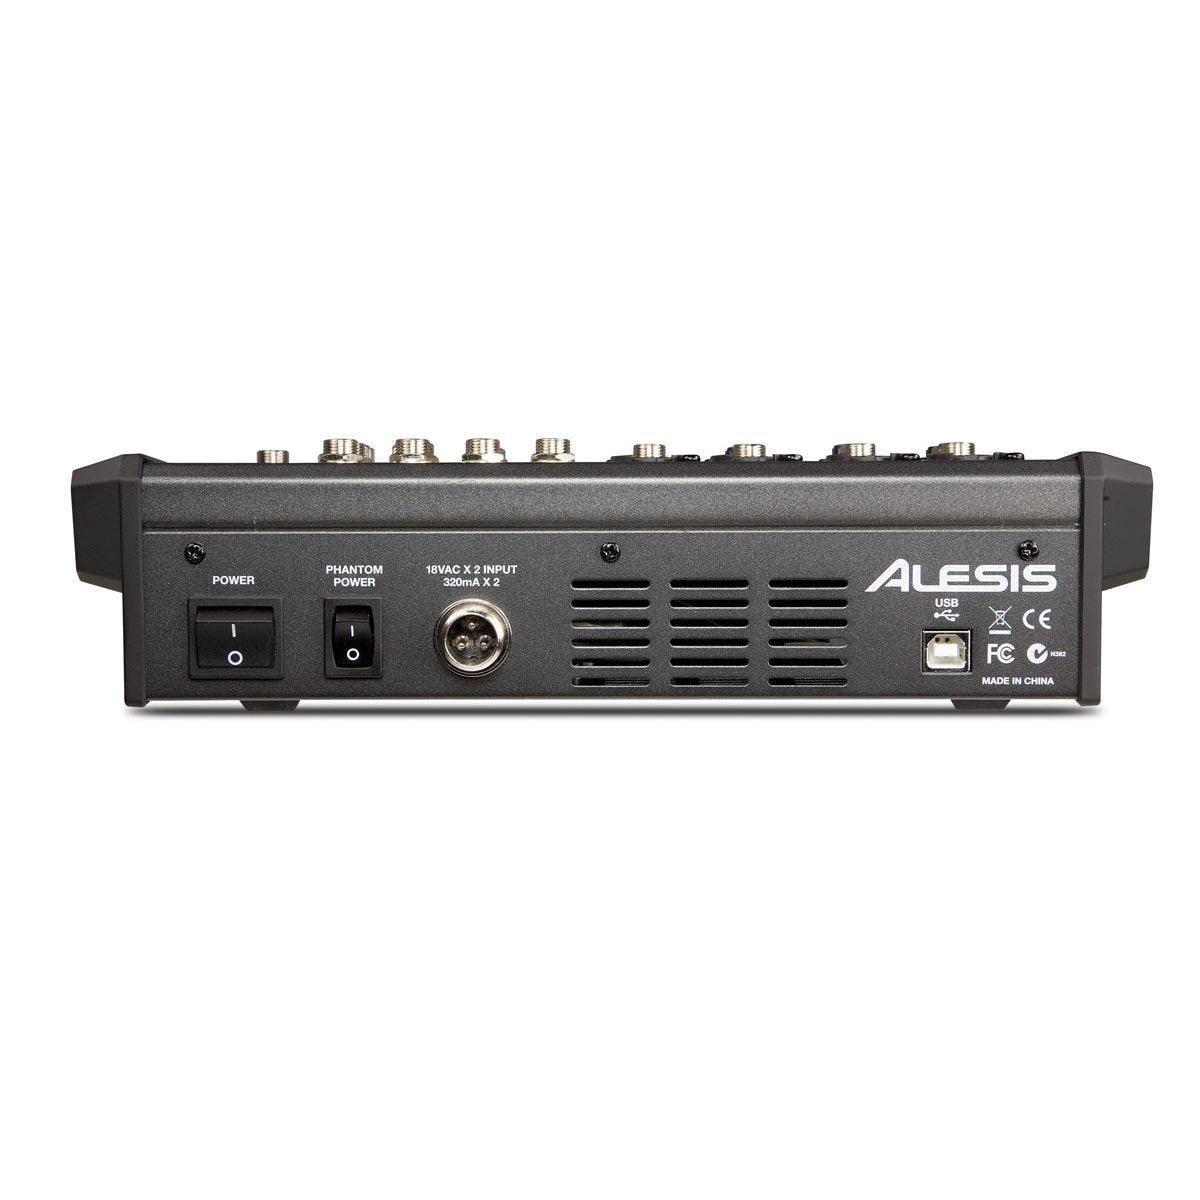 Alesis MultiMix 8 USB FX Analog Mixer / USB Audio Interface with Effects